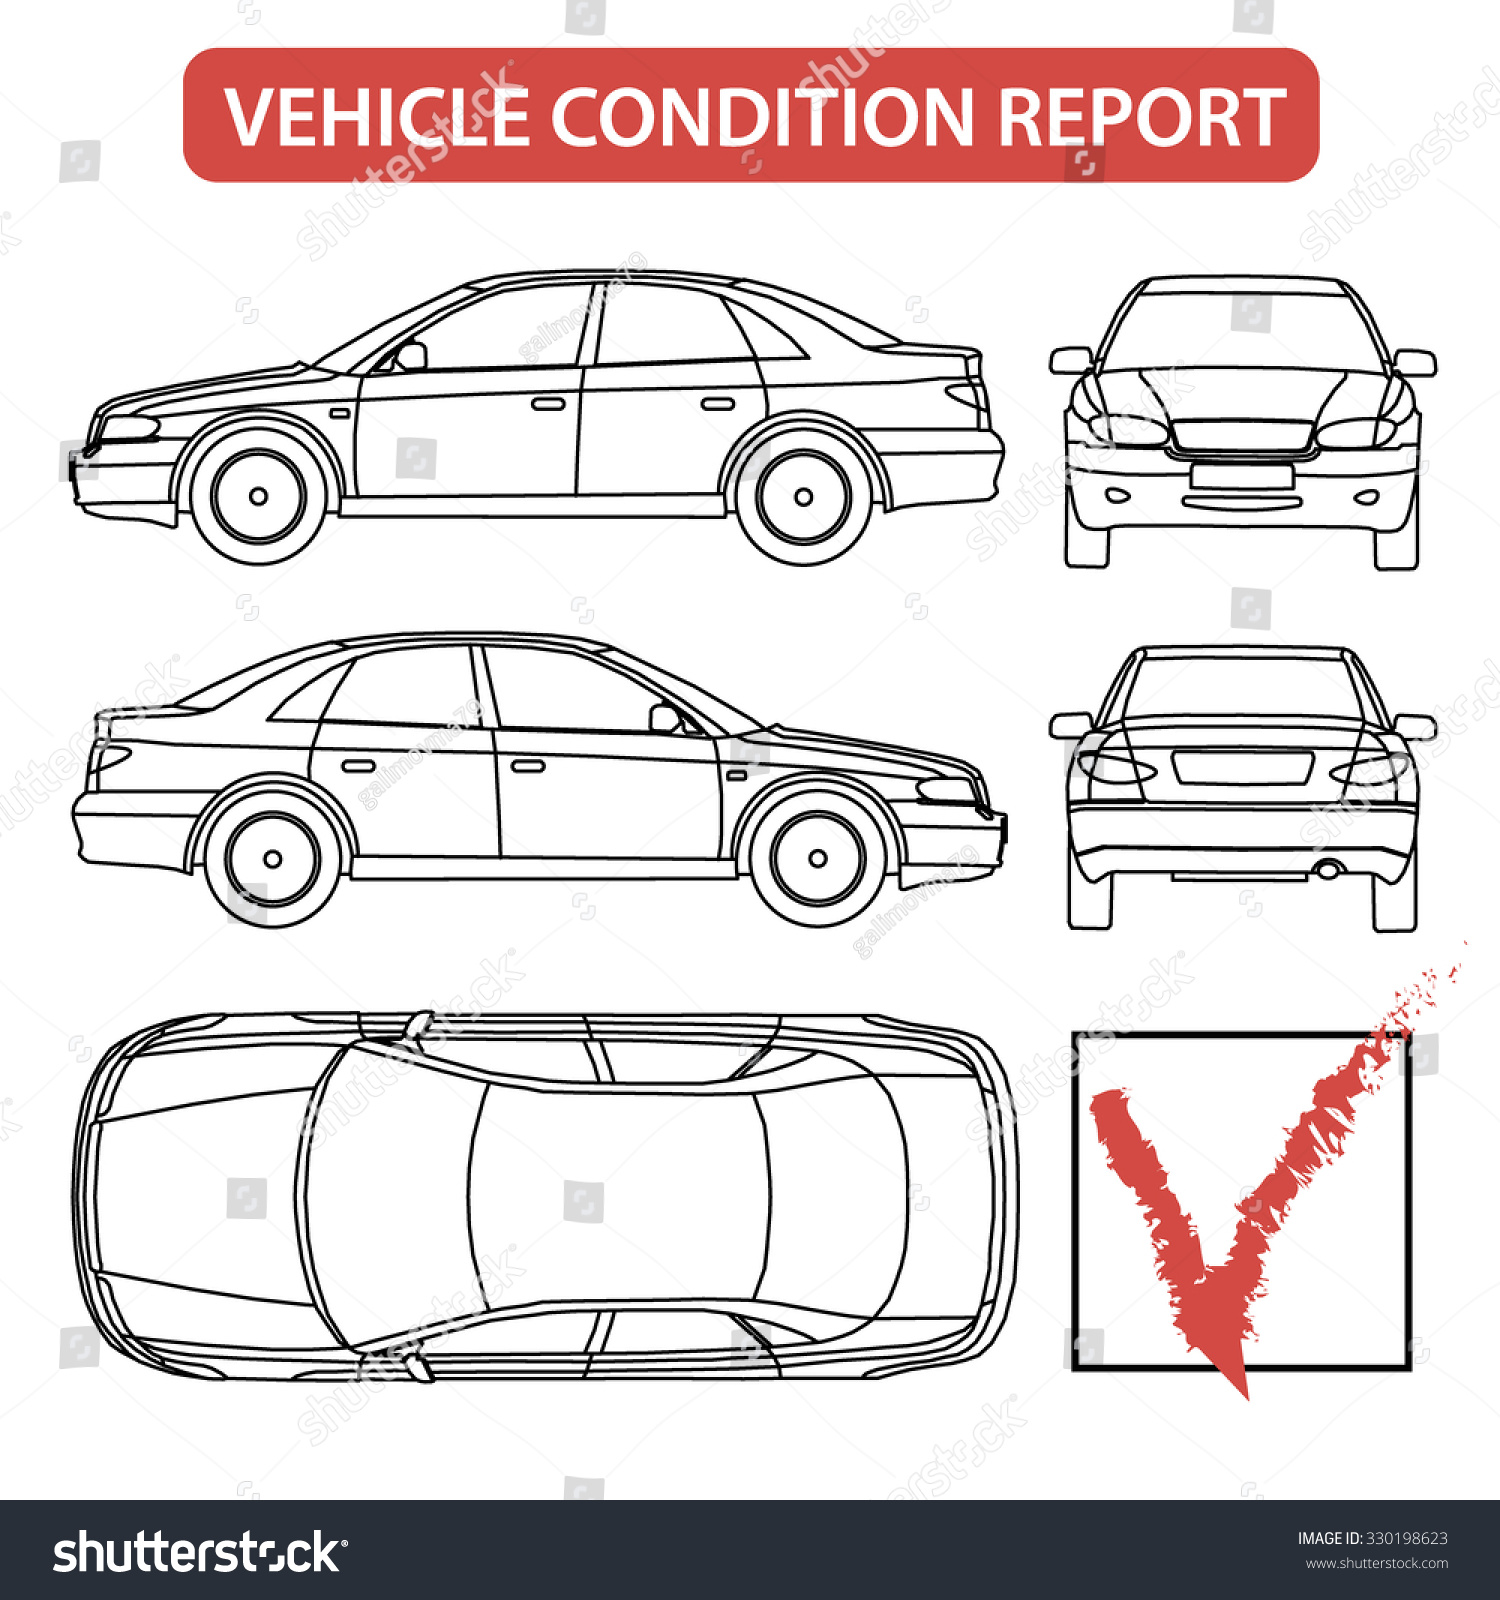 Car Inspection Checklist Template from image.shutterstock.com